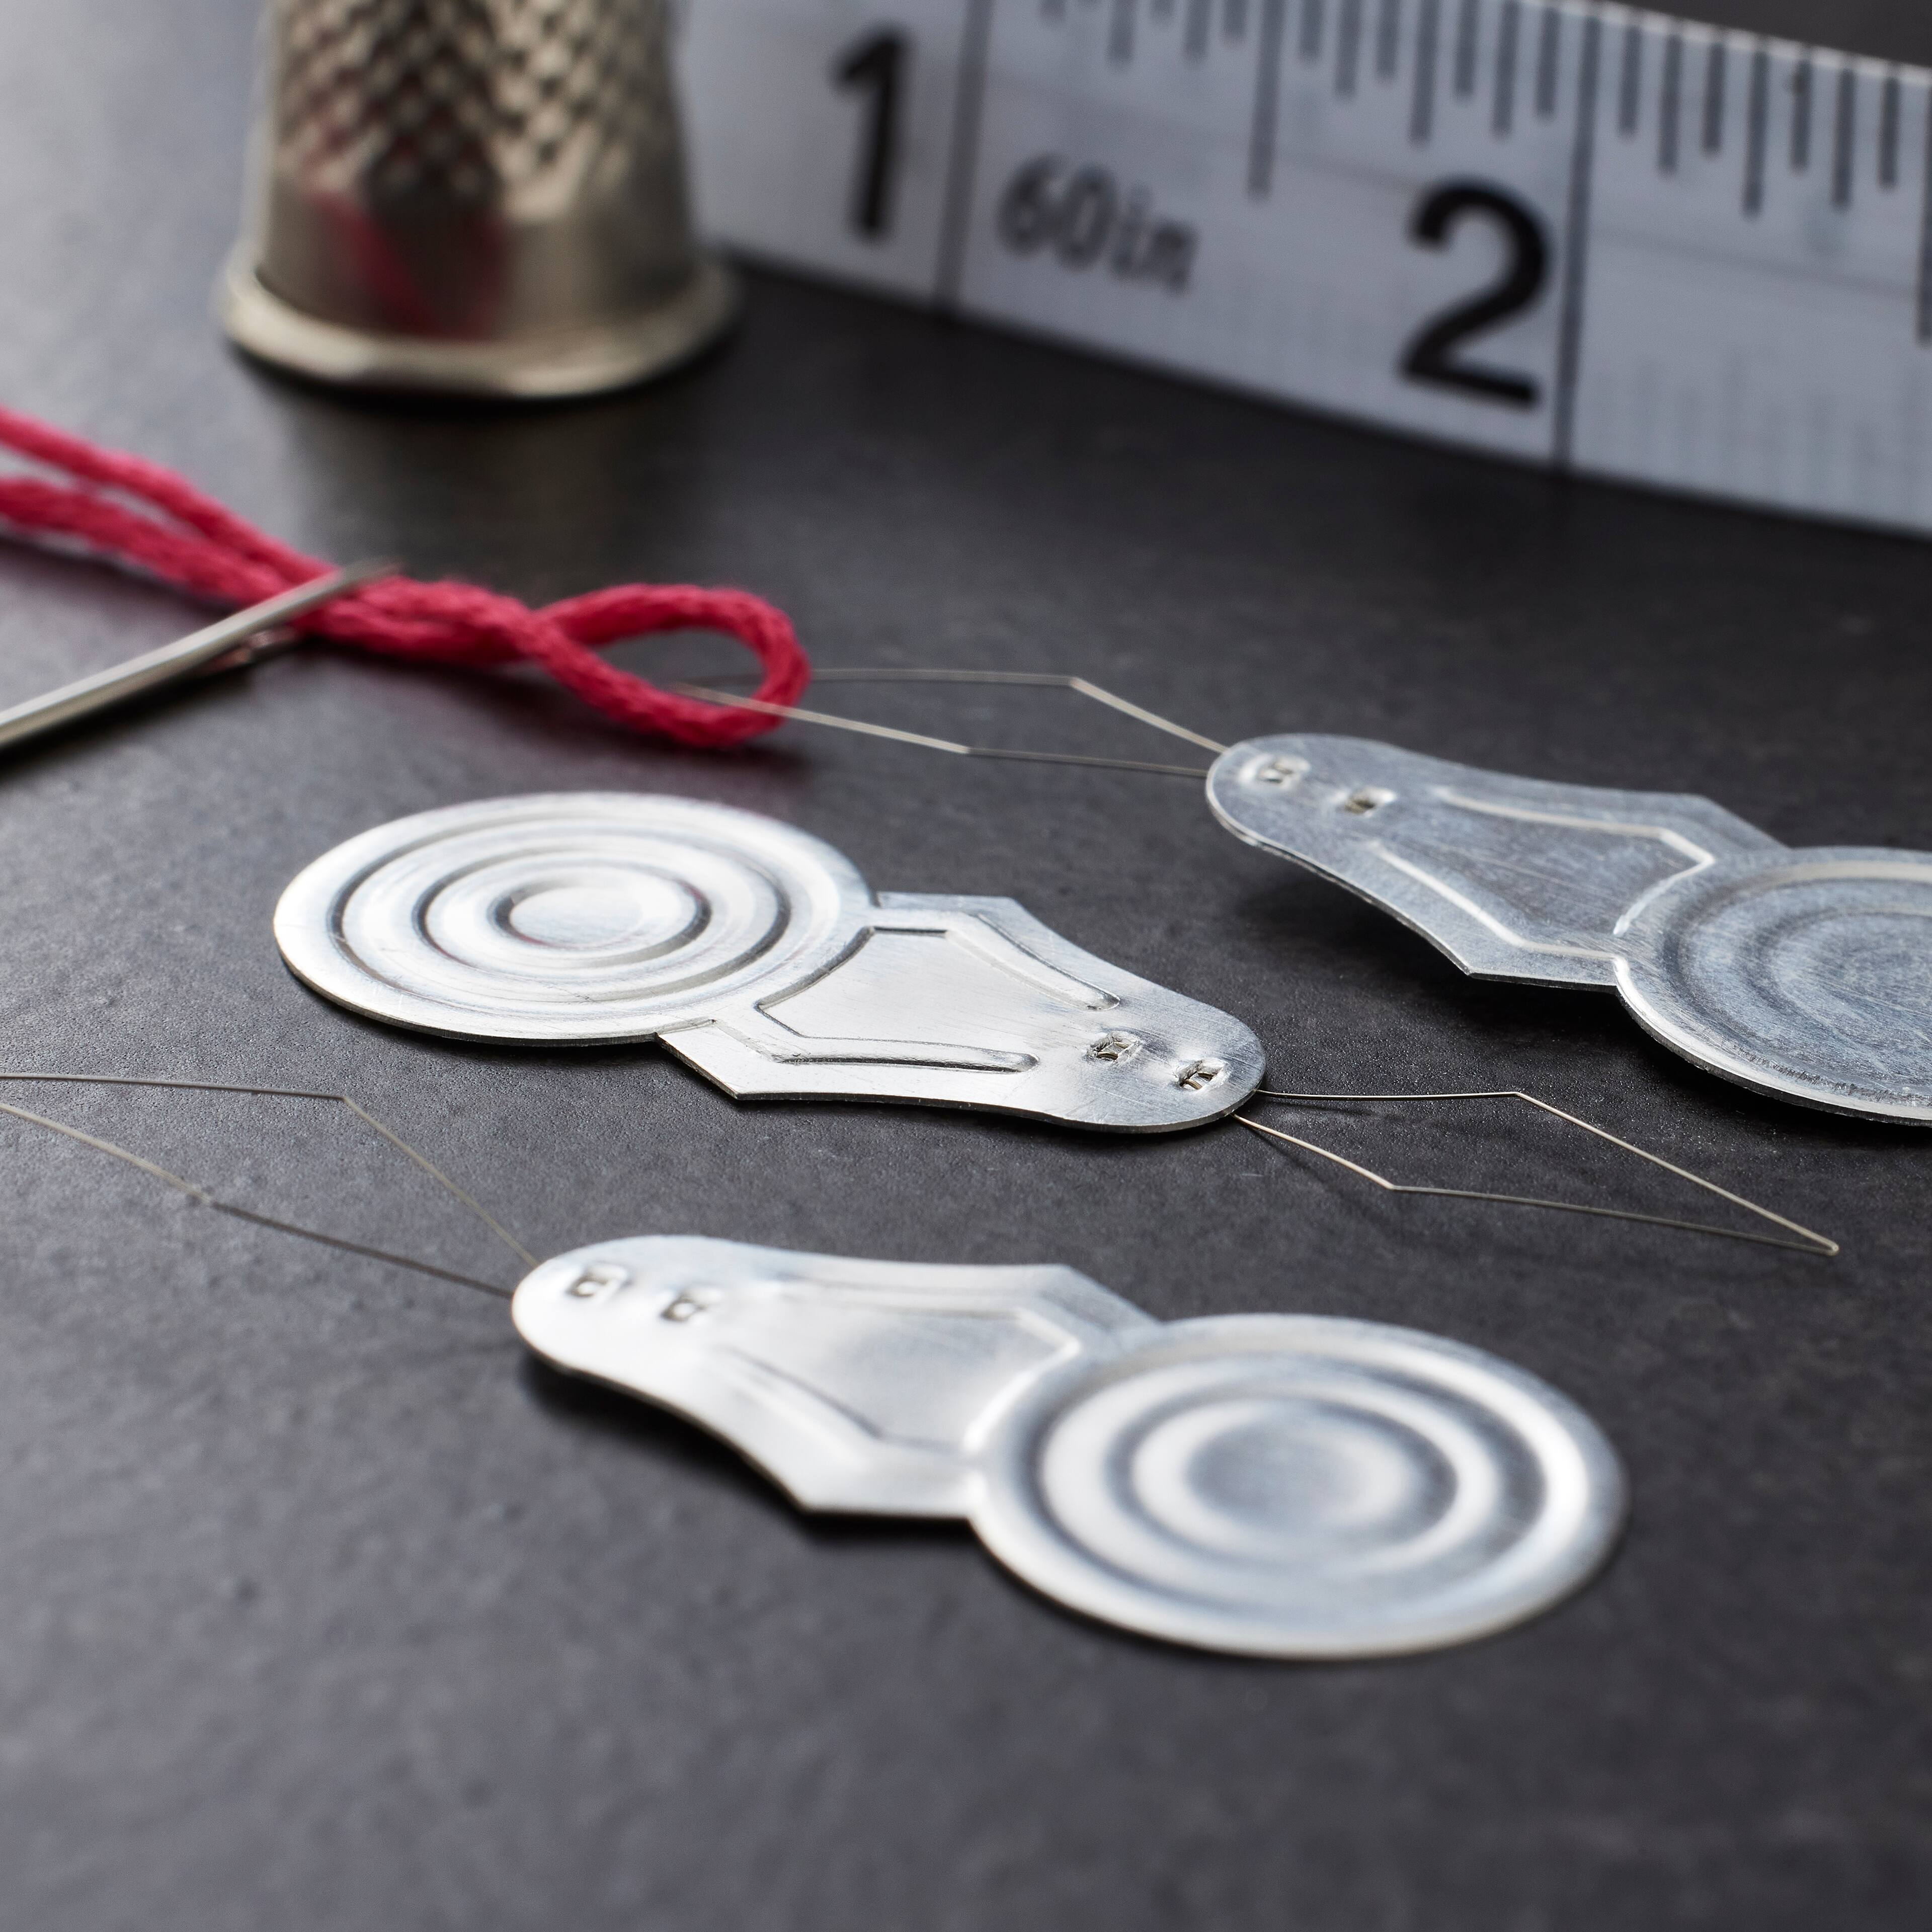 Loops & Threads™ Wire Needle Threaders